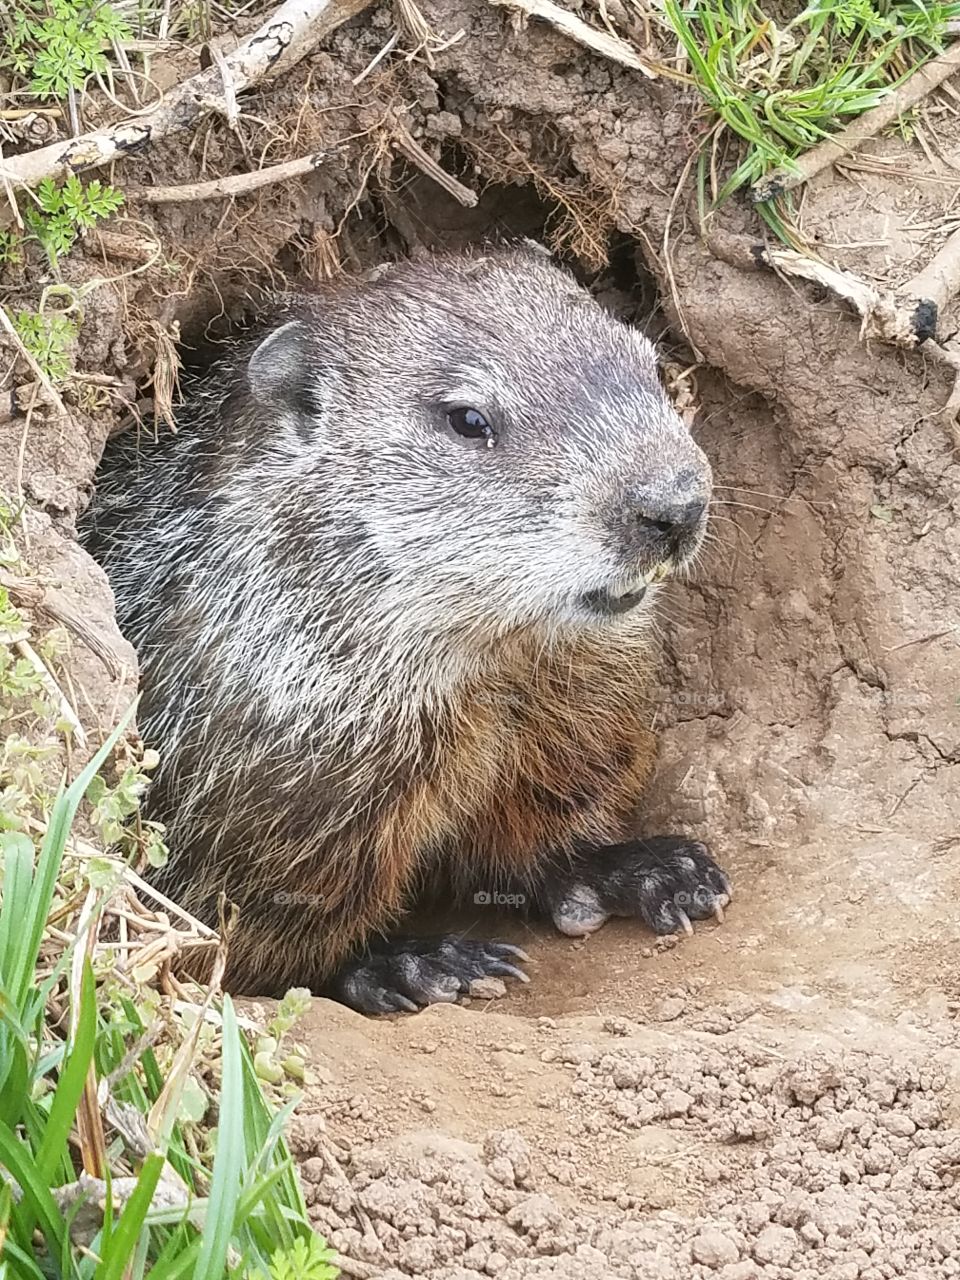 Ground hog taking a break from digging.